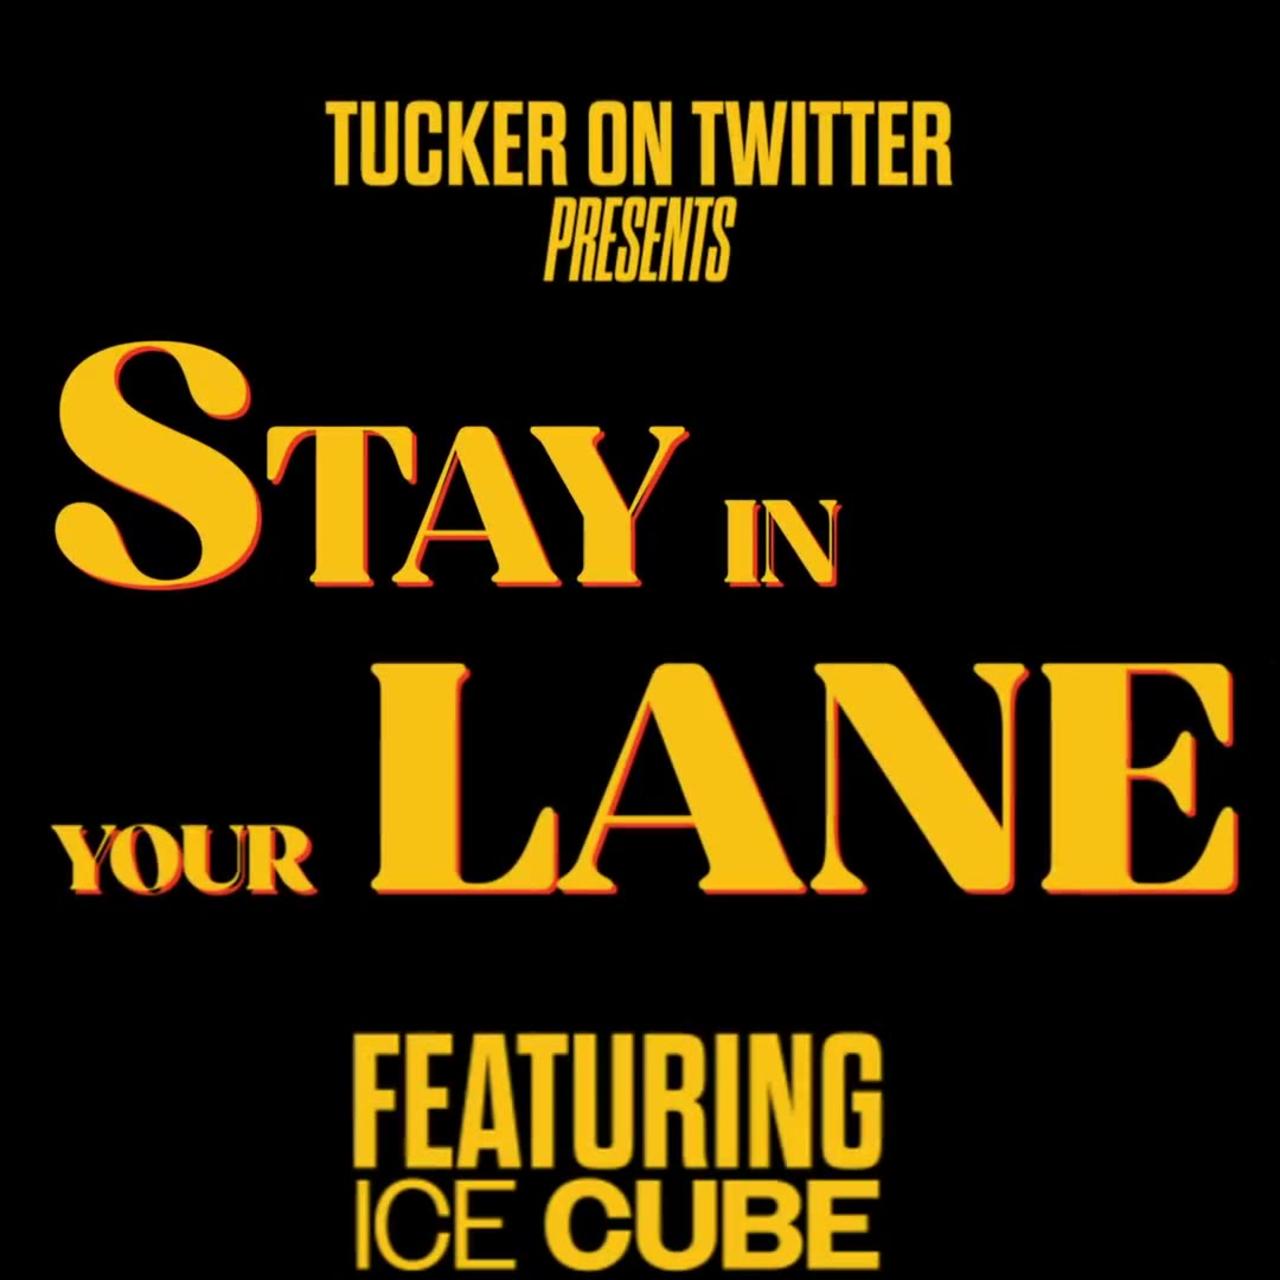 Stay in your lane: our drive through South Central LA with Ice Cube. Episode 11